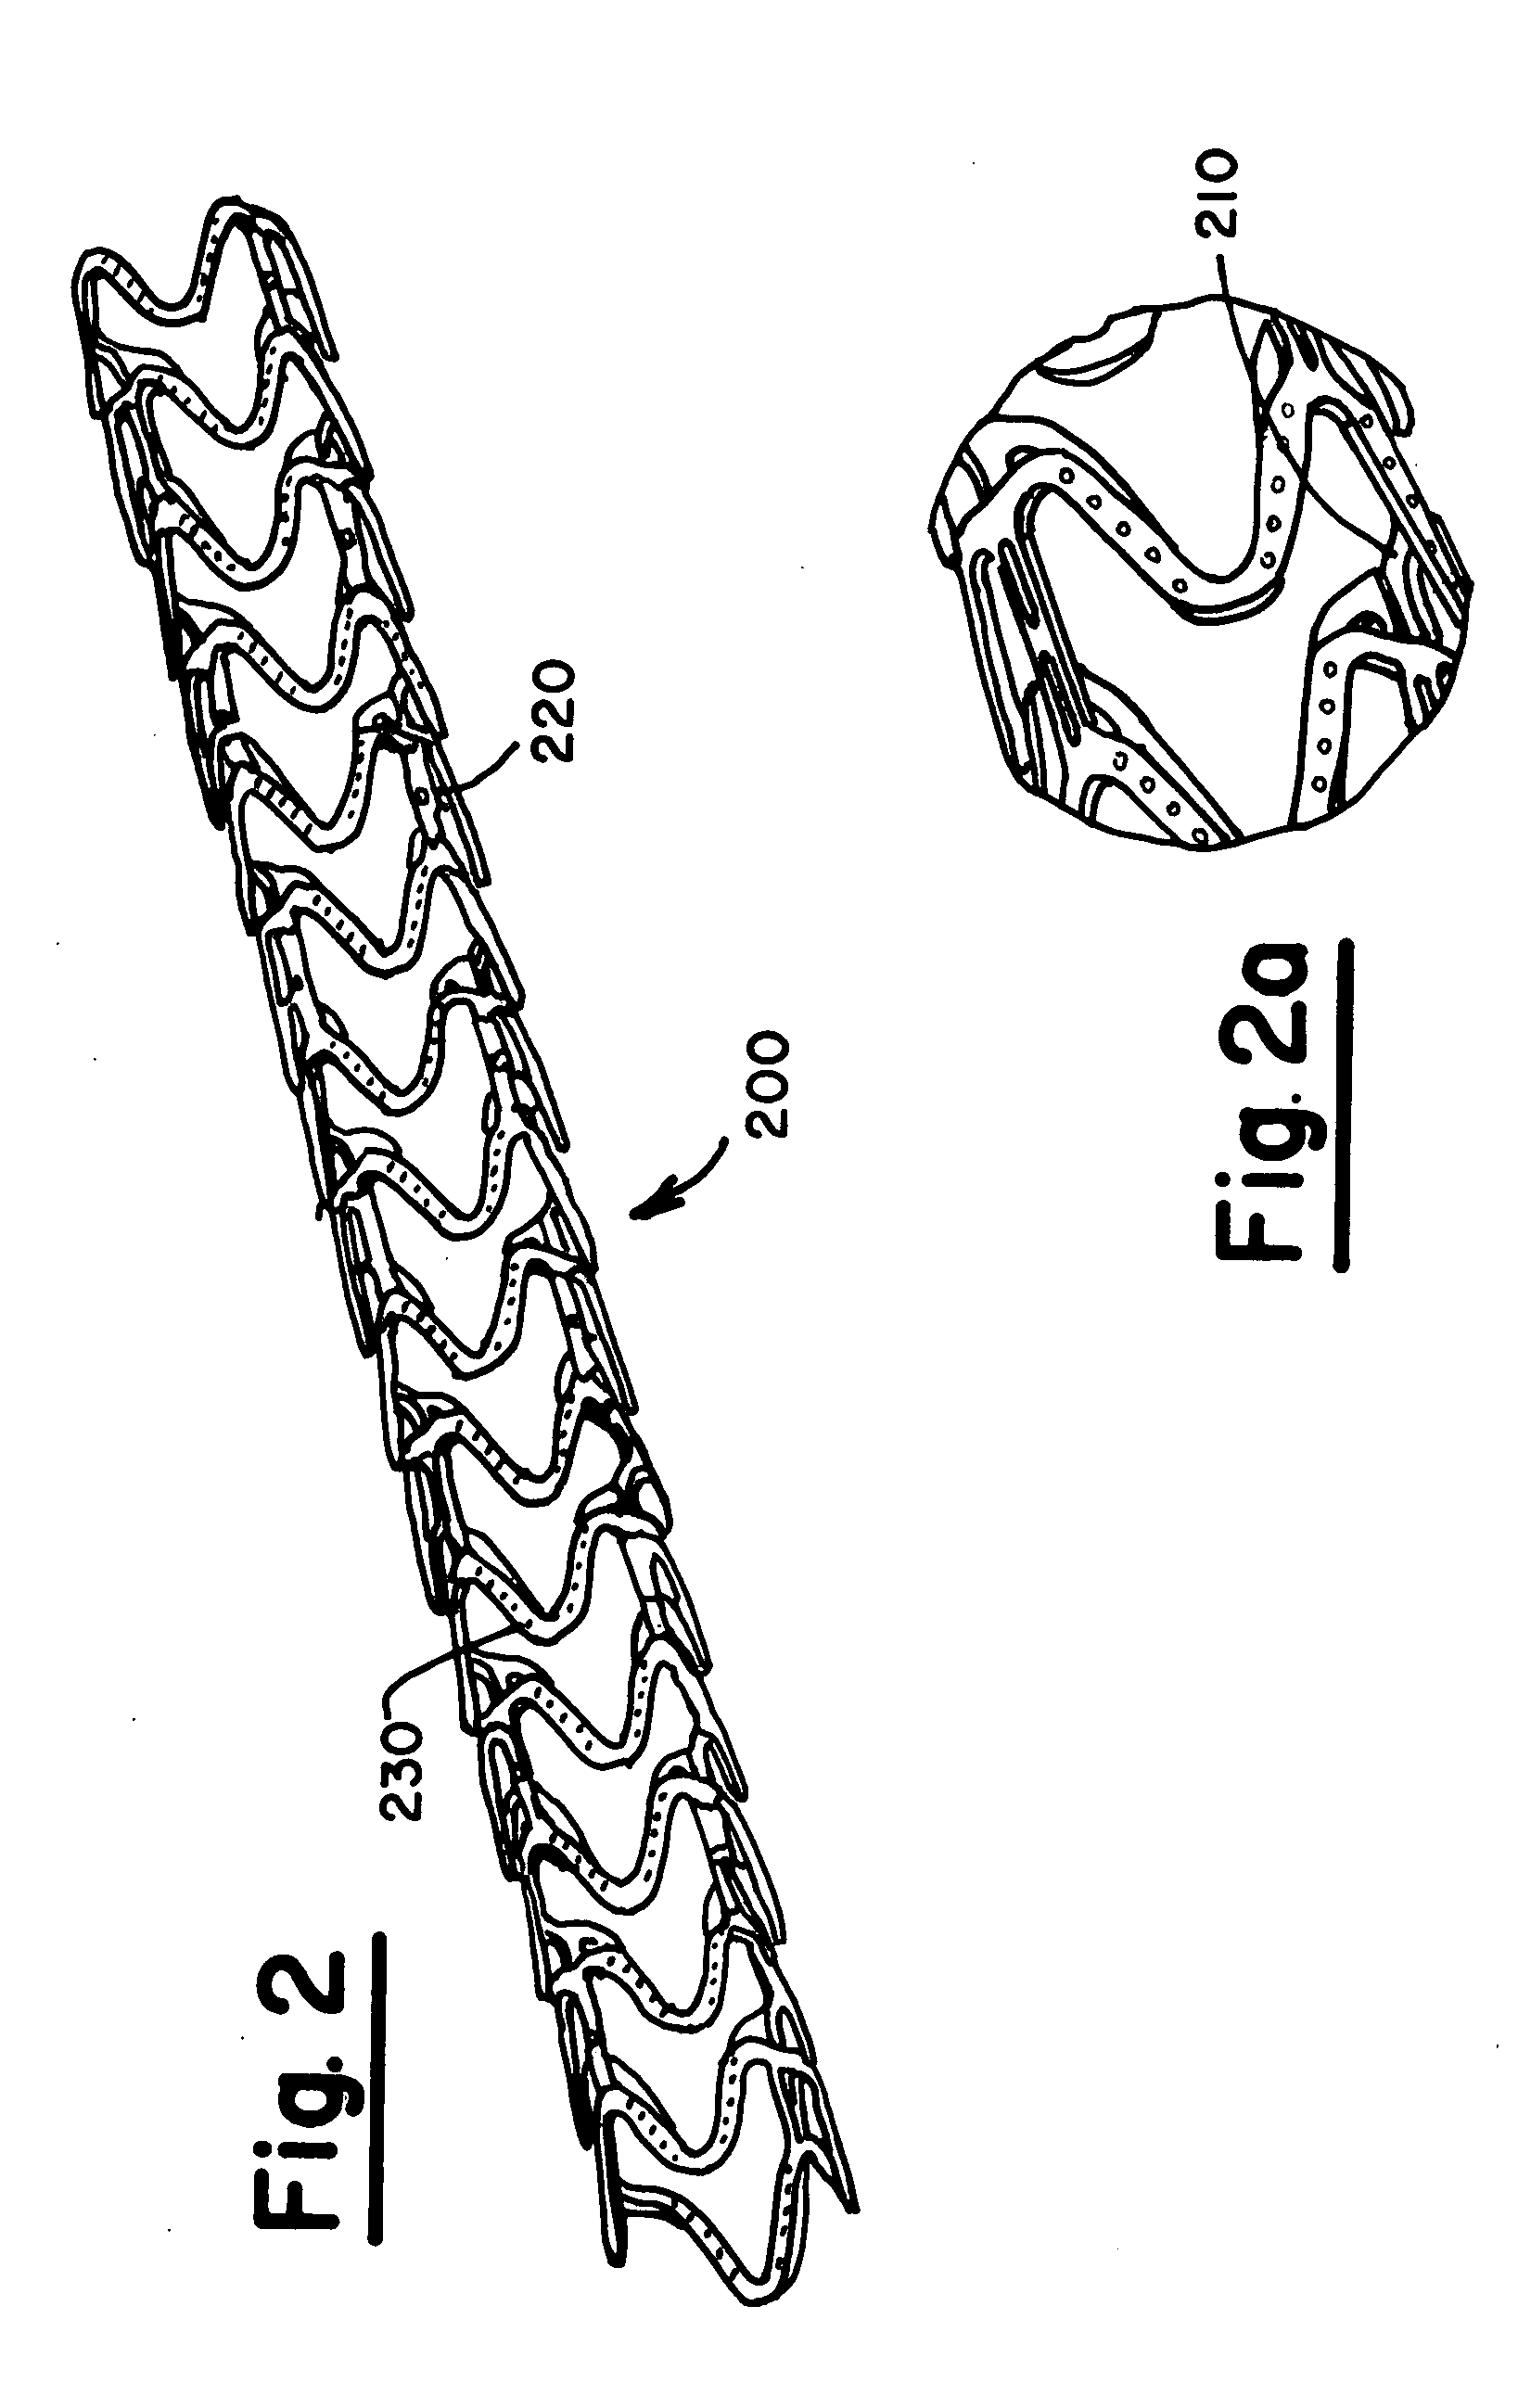 Pitted metallic implants and method of manufacturing thereof